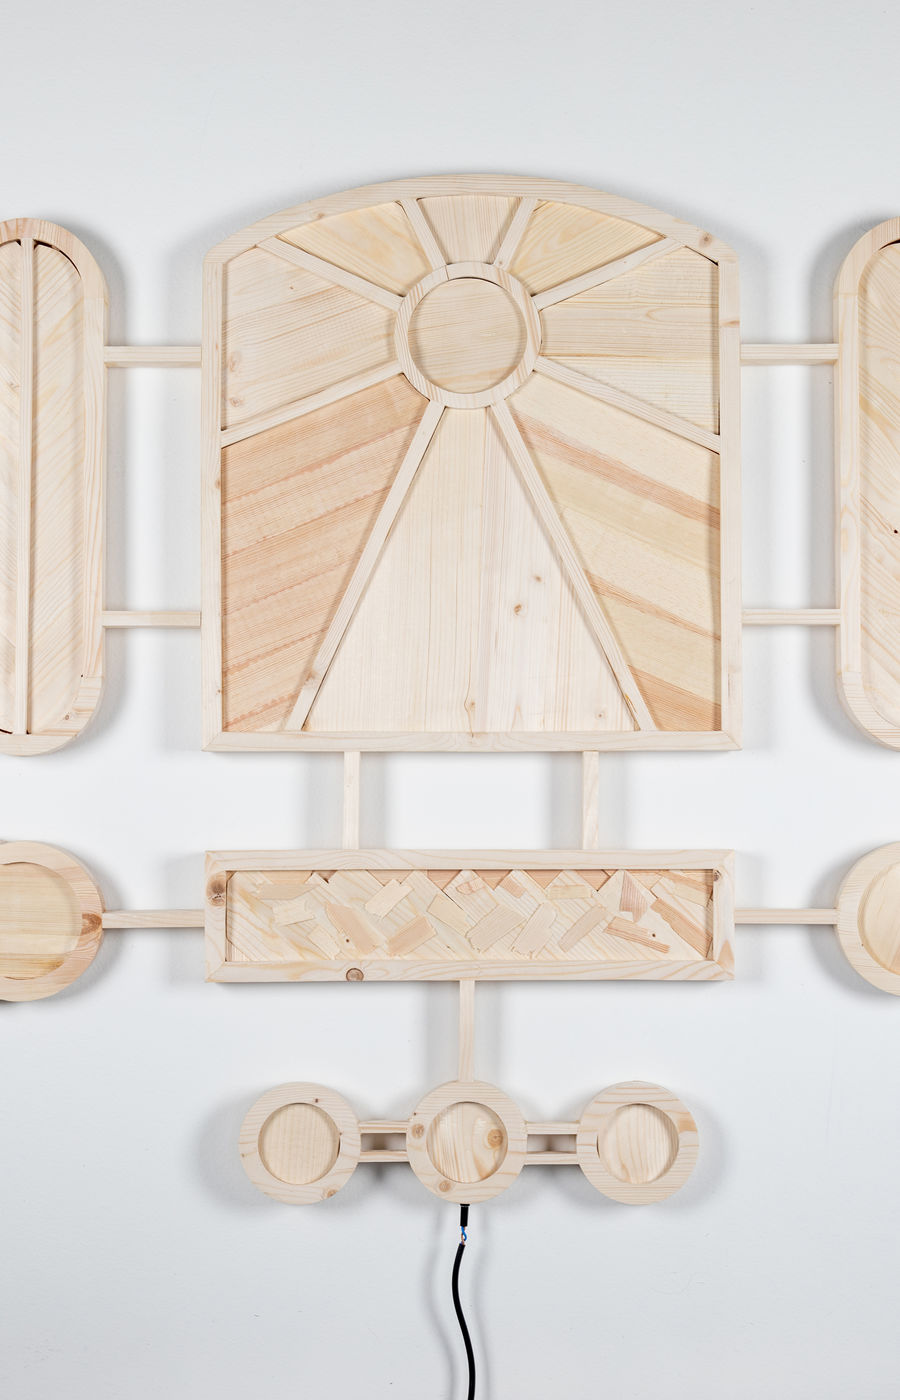 Wood Shrine, wooden light panel, off on a white background.